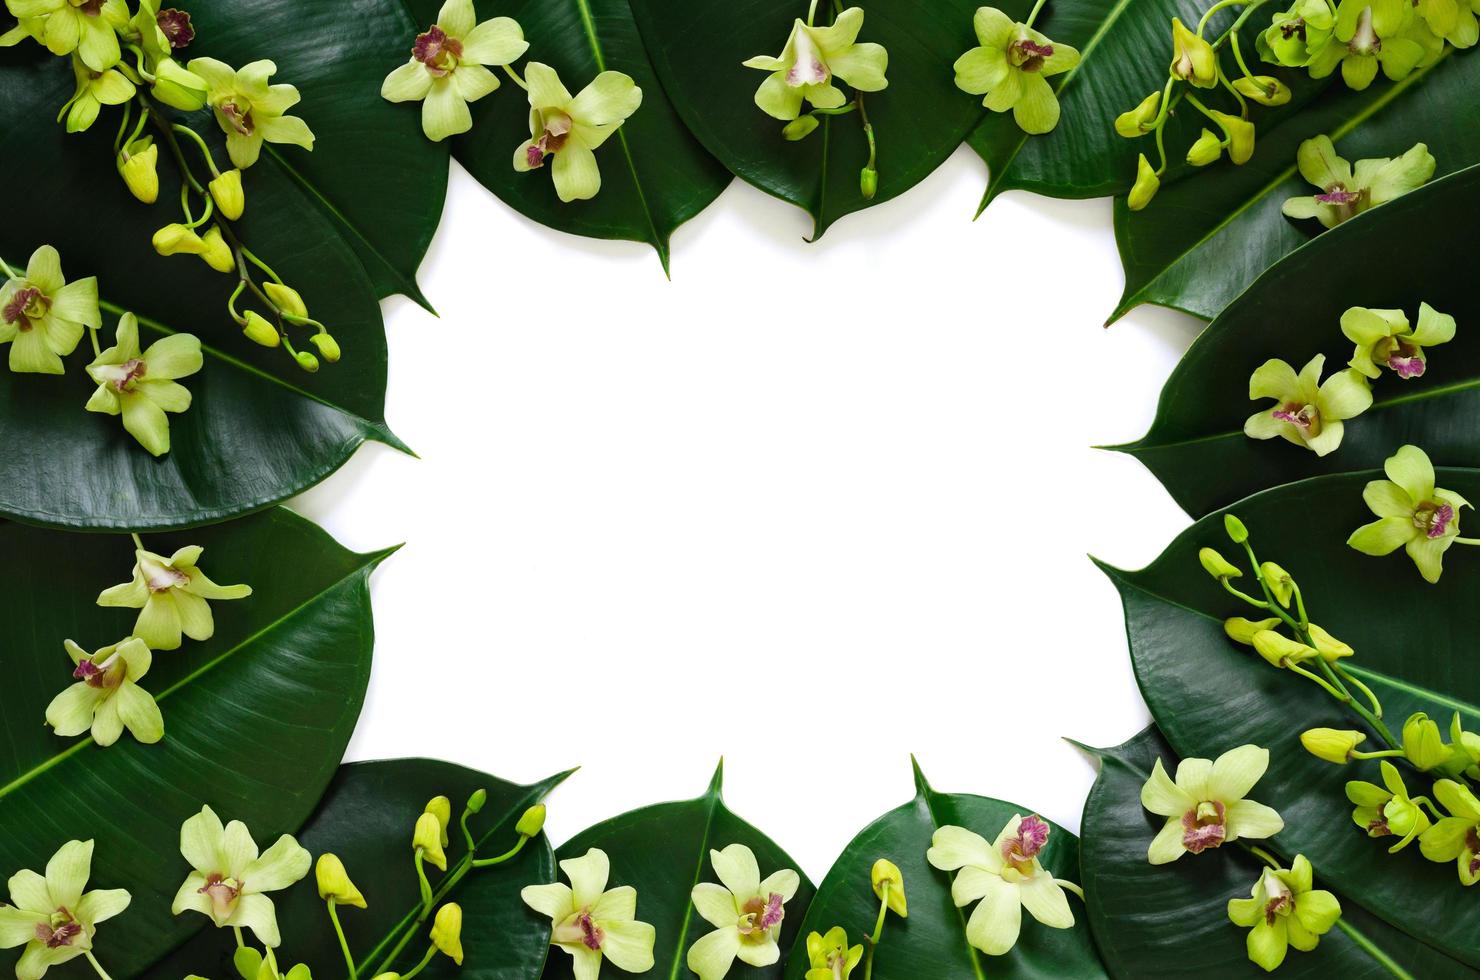 Green orchid flowers put on rubber tree leaves for spring blossom photo concept.